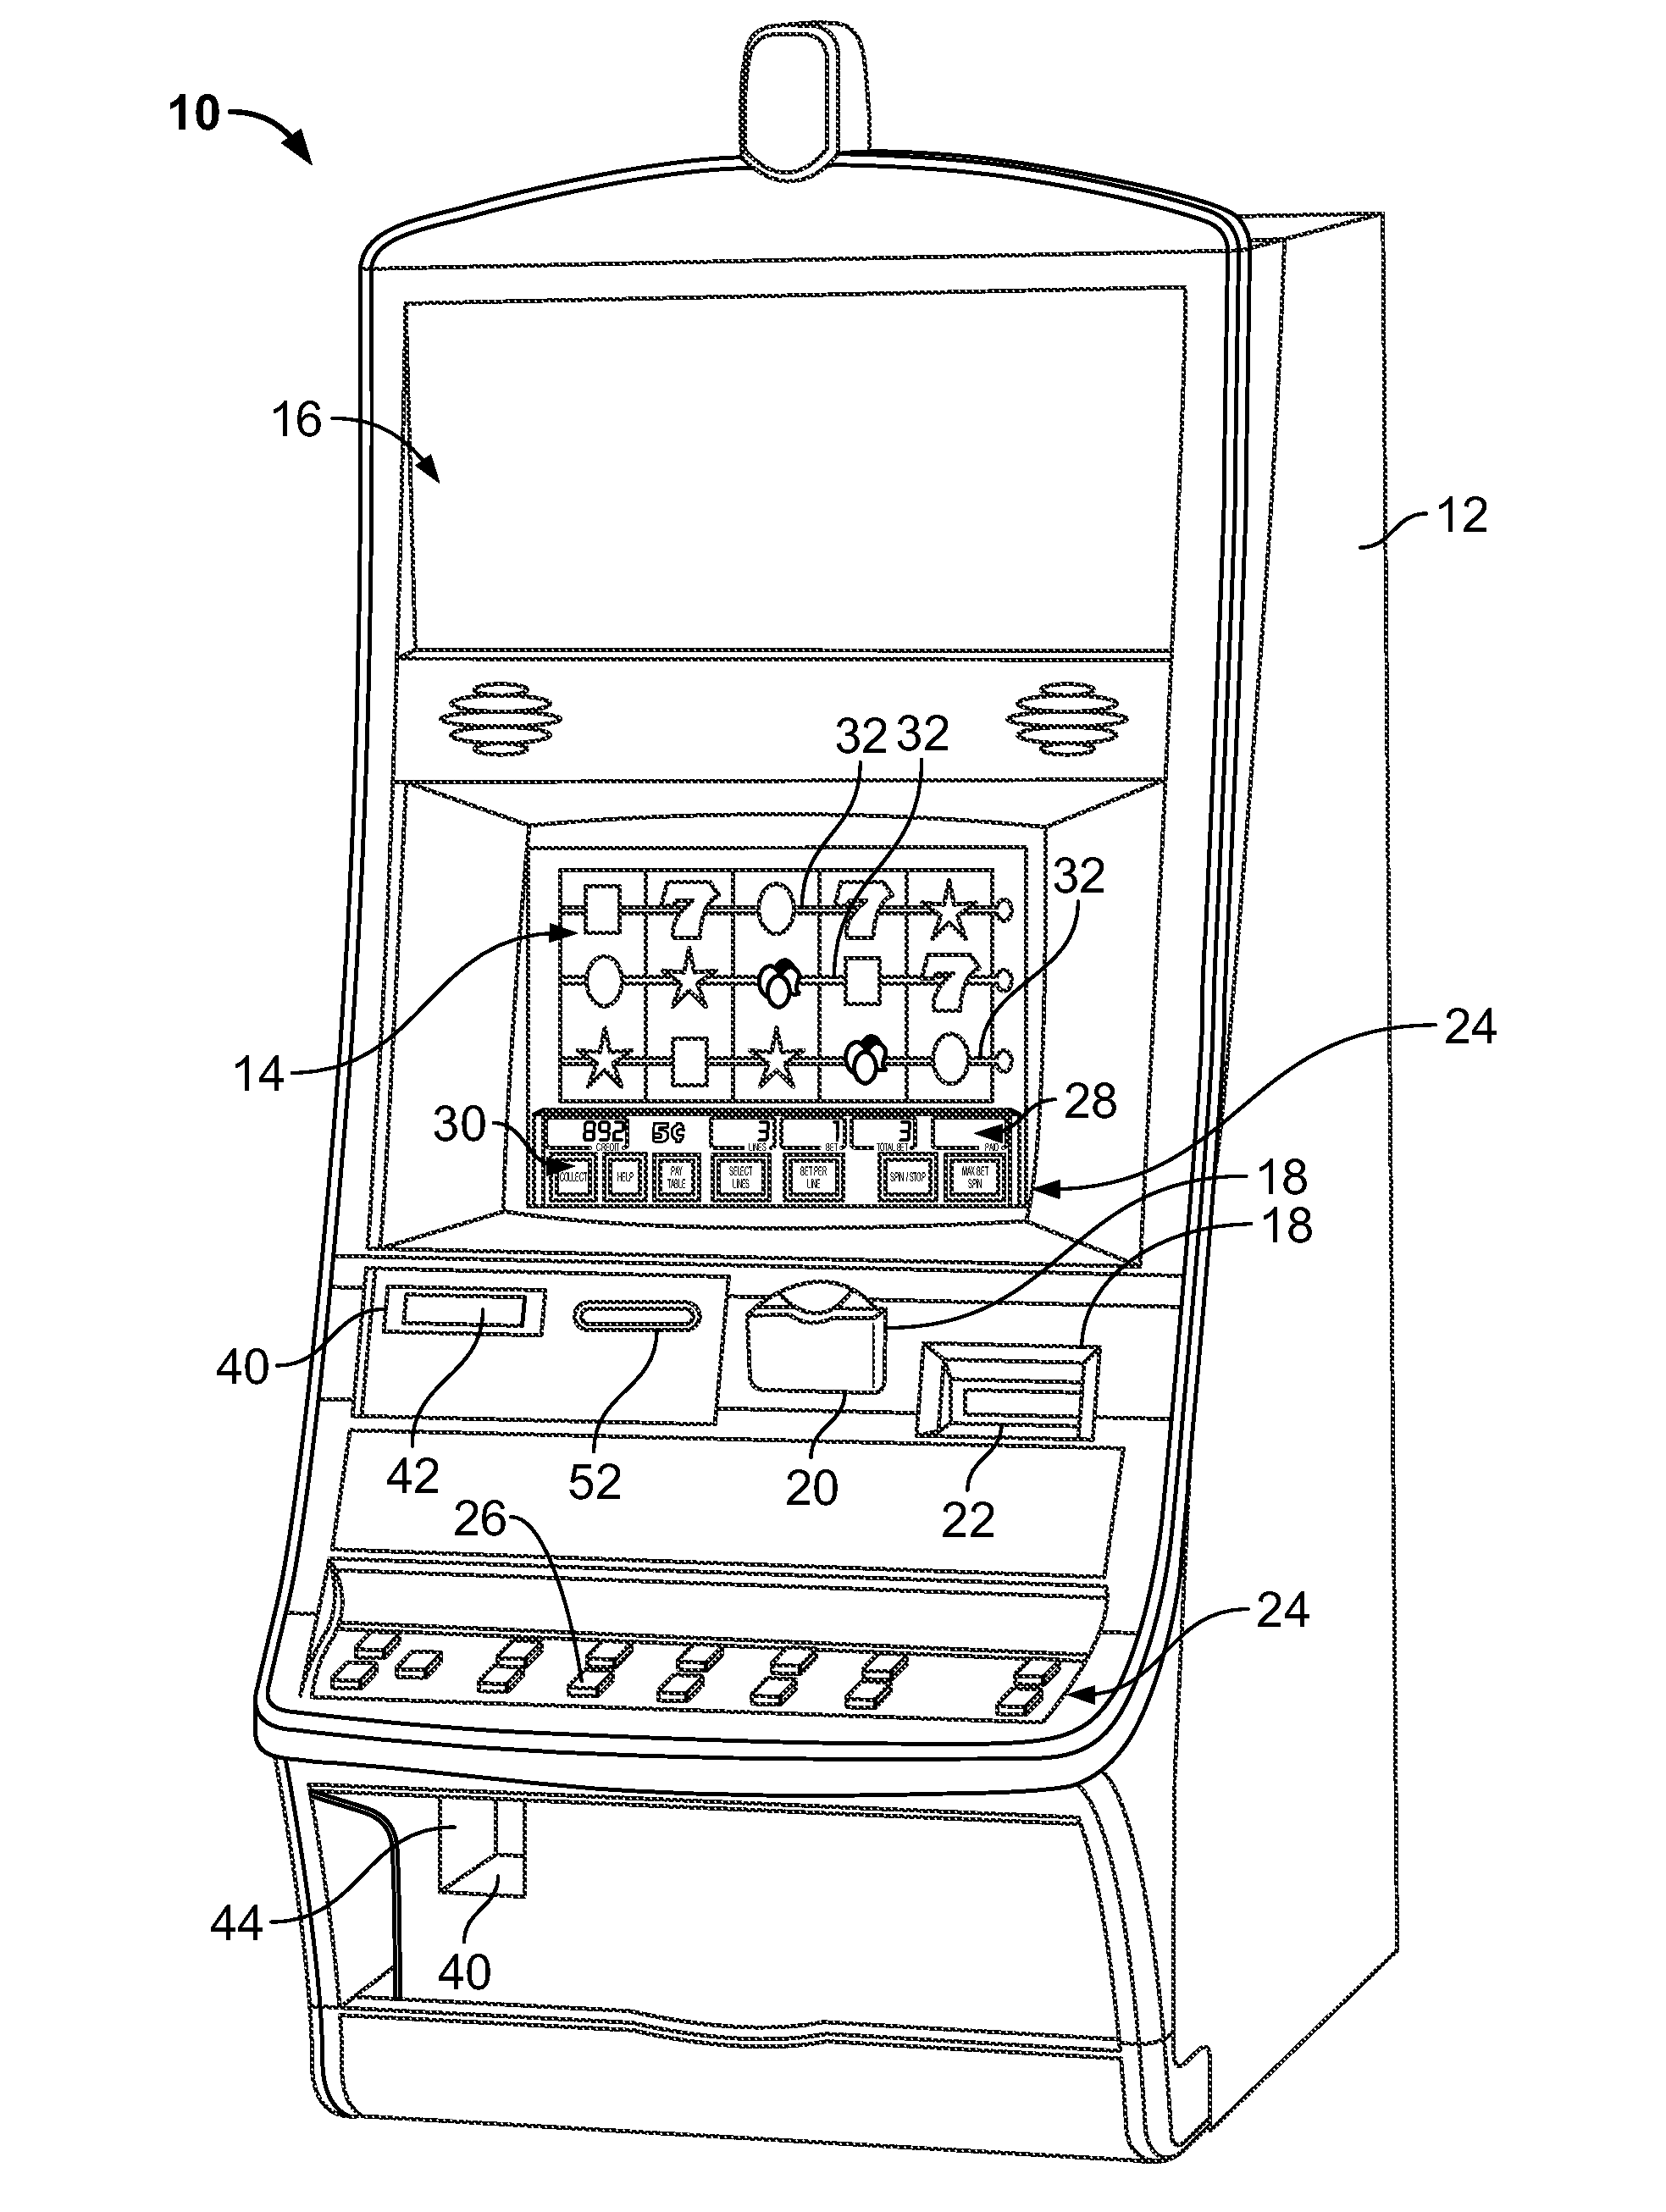 Methods of Receiving Electronic Wagers in a Wagering Game Via a Handheld Electronic Wager Input Device